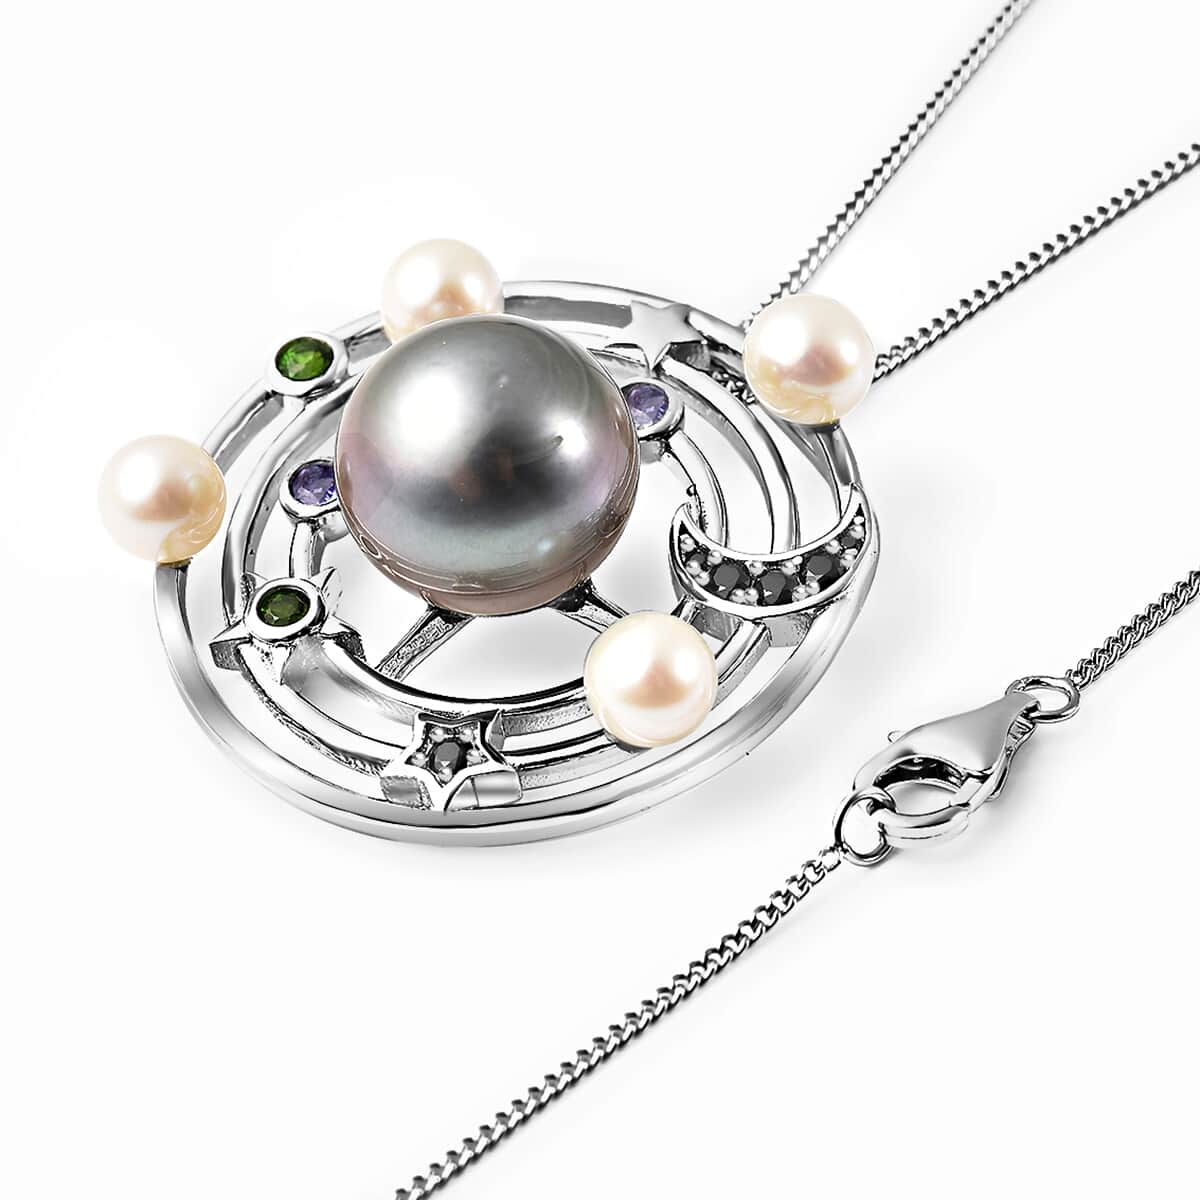 Tahitian Black Pearl Pendant Necklace , Multi Gemstone Pendant Necklace For Women , Sterling Silver Necklace , Solar System Pendant Necklace, Princess Length Necklace 18 Inches image number 3